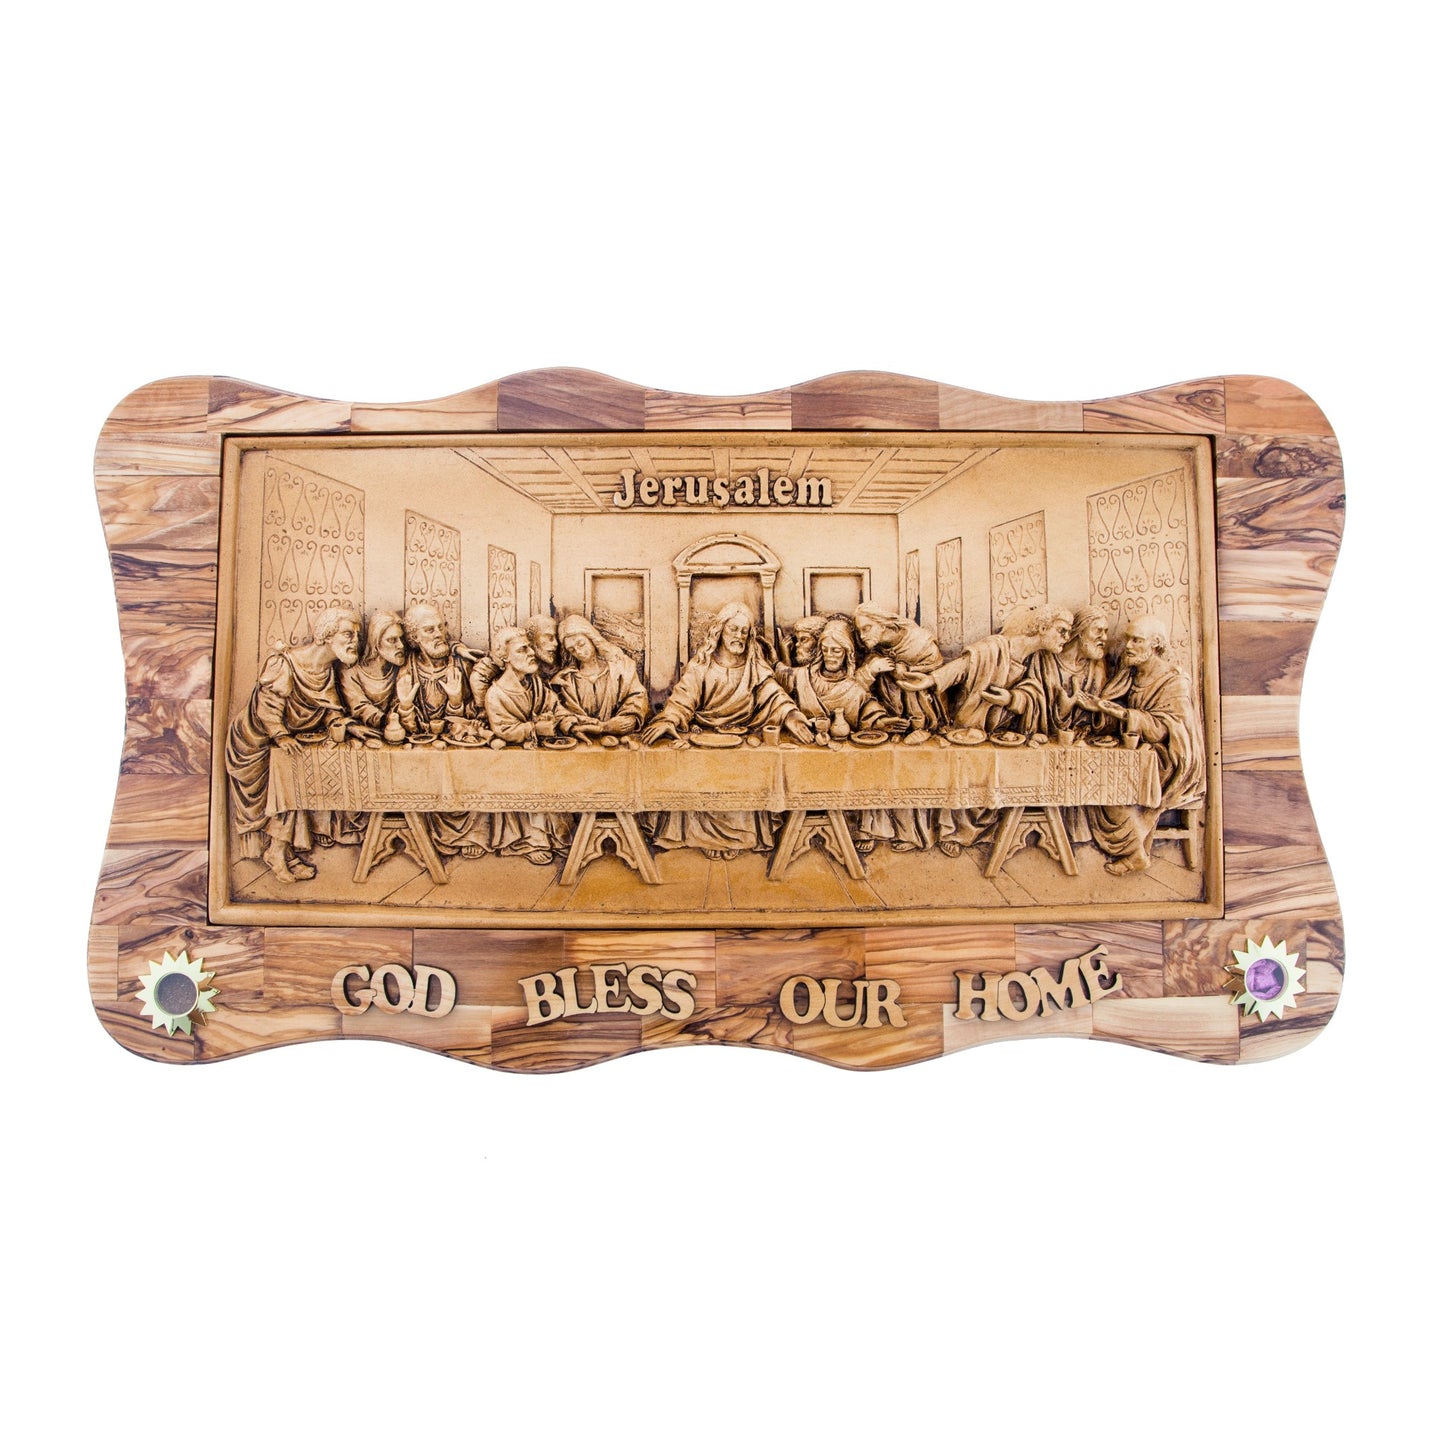 "Last Supper", Carved Wooden Wall Hanging Plaque, 17.7" with Holy Land Incense